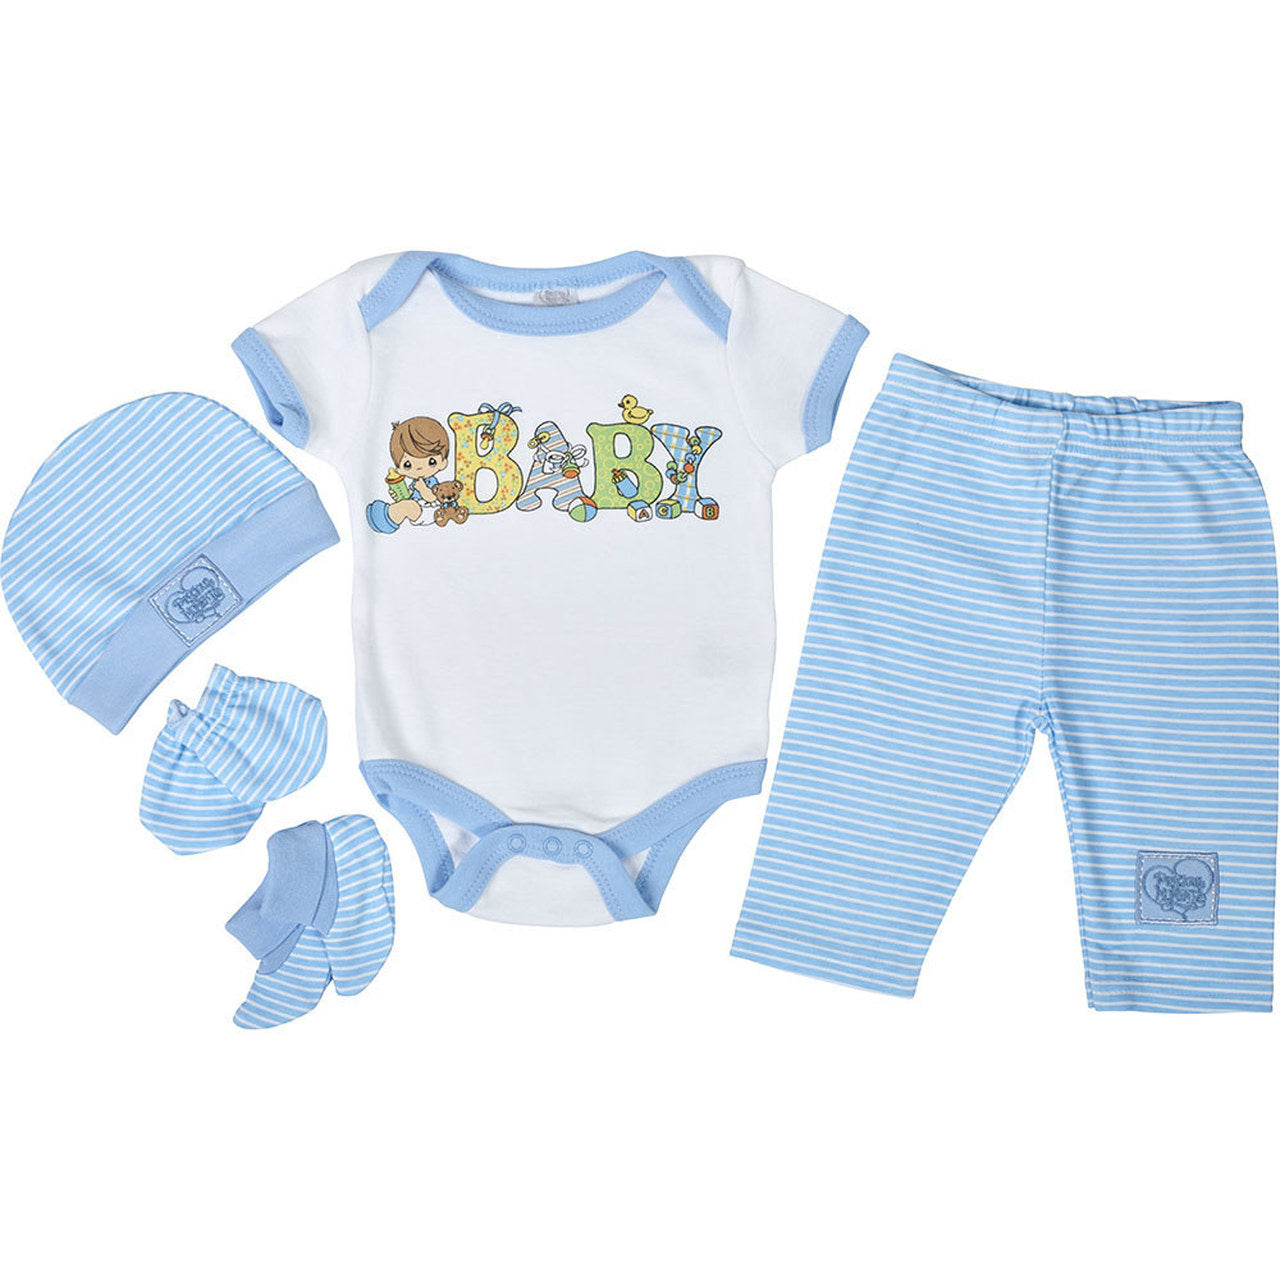 New Born Baby Clothes - Buy Clothing Gift Set for Newborns